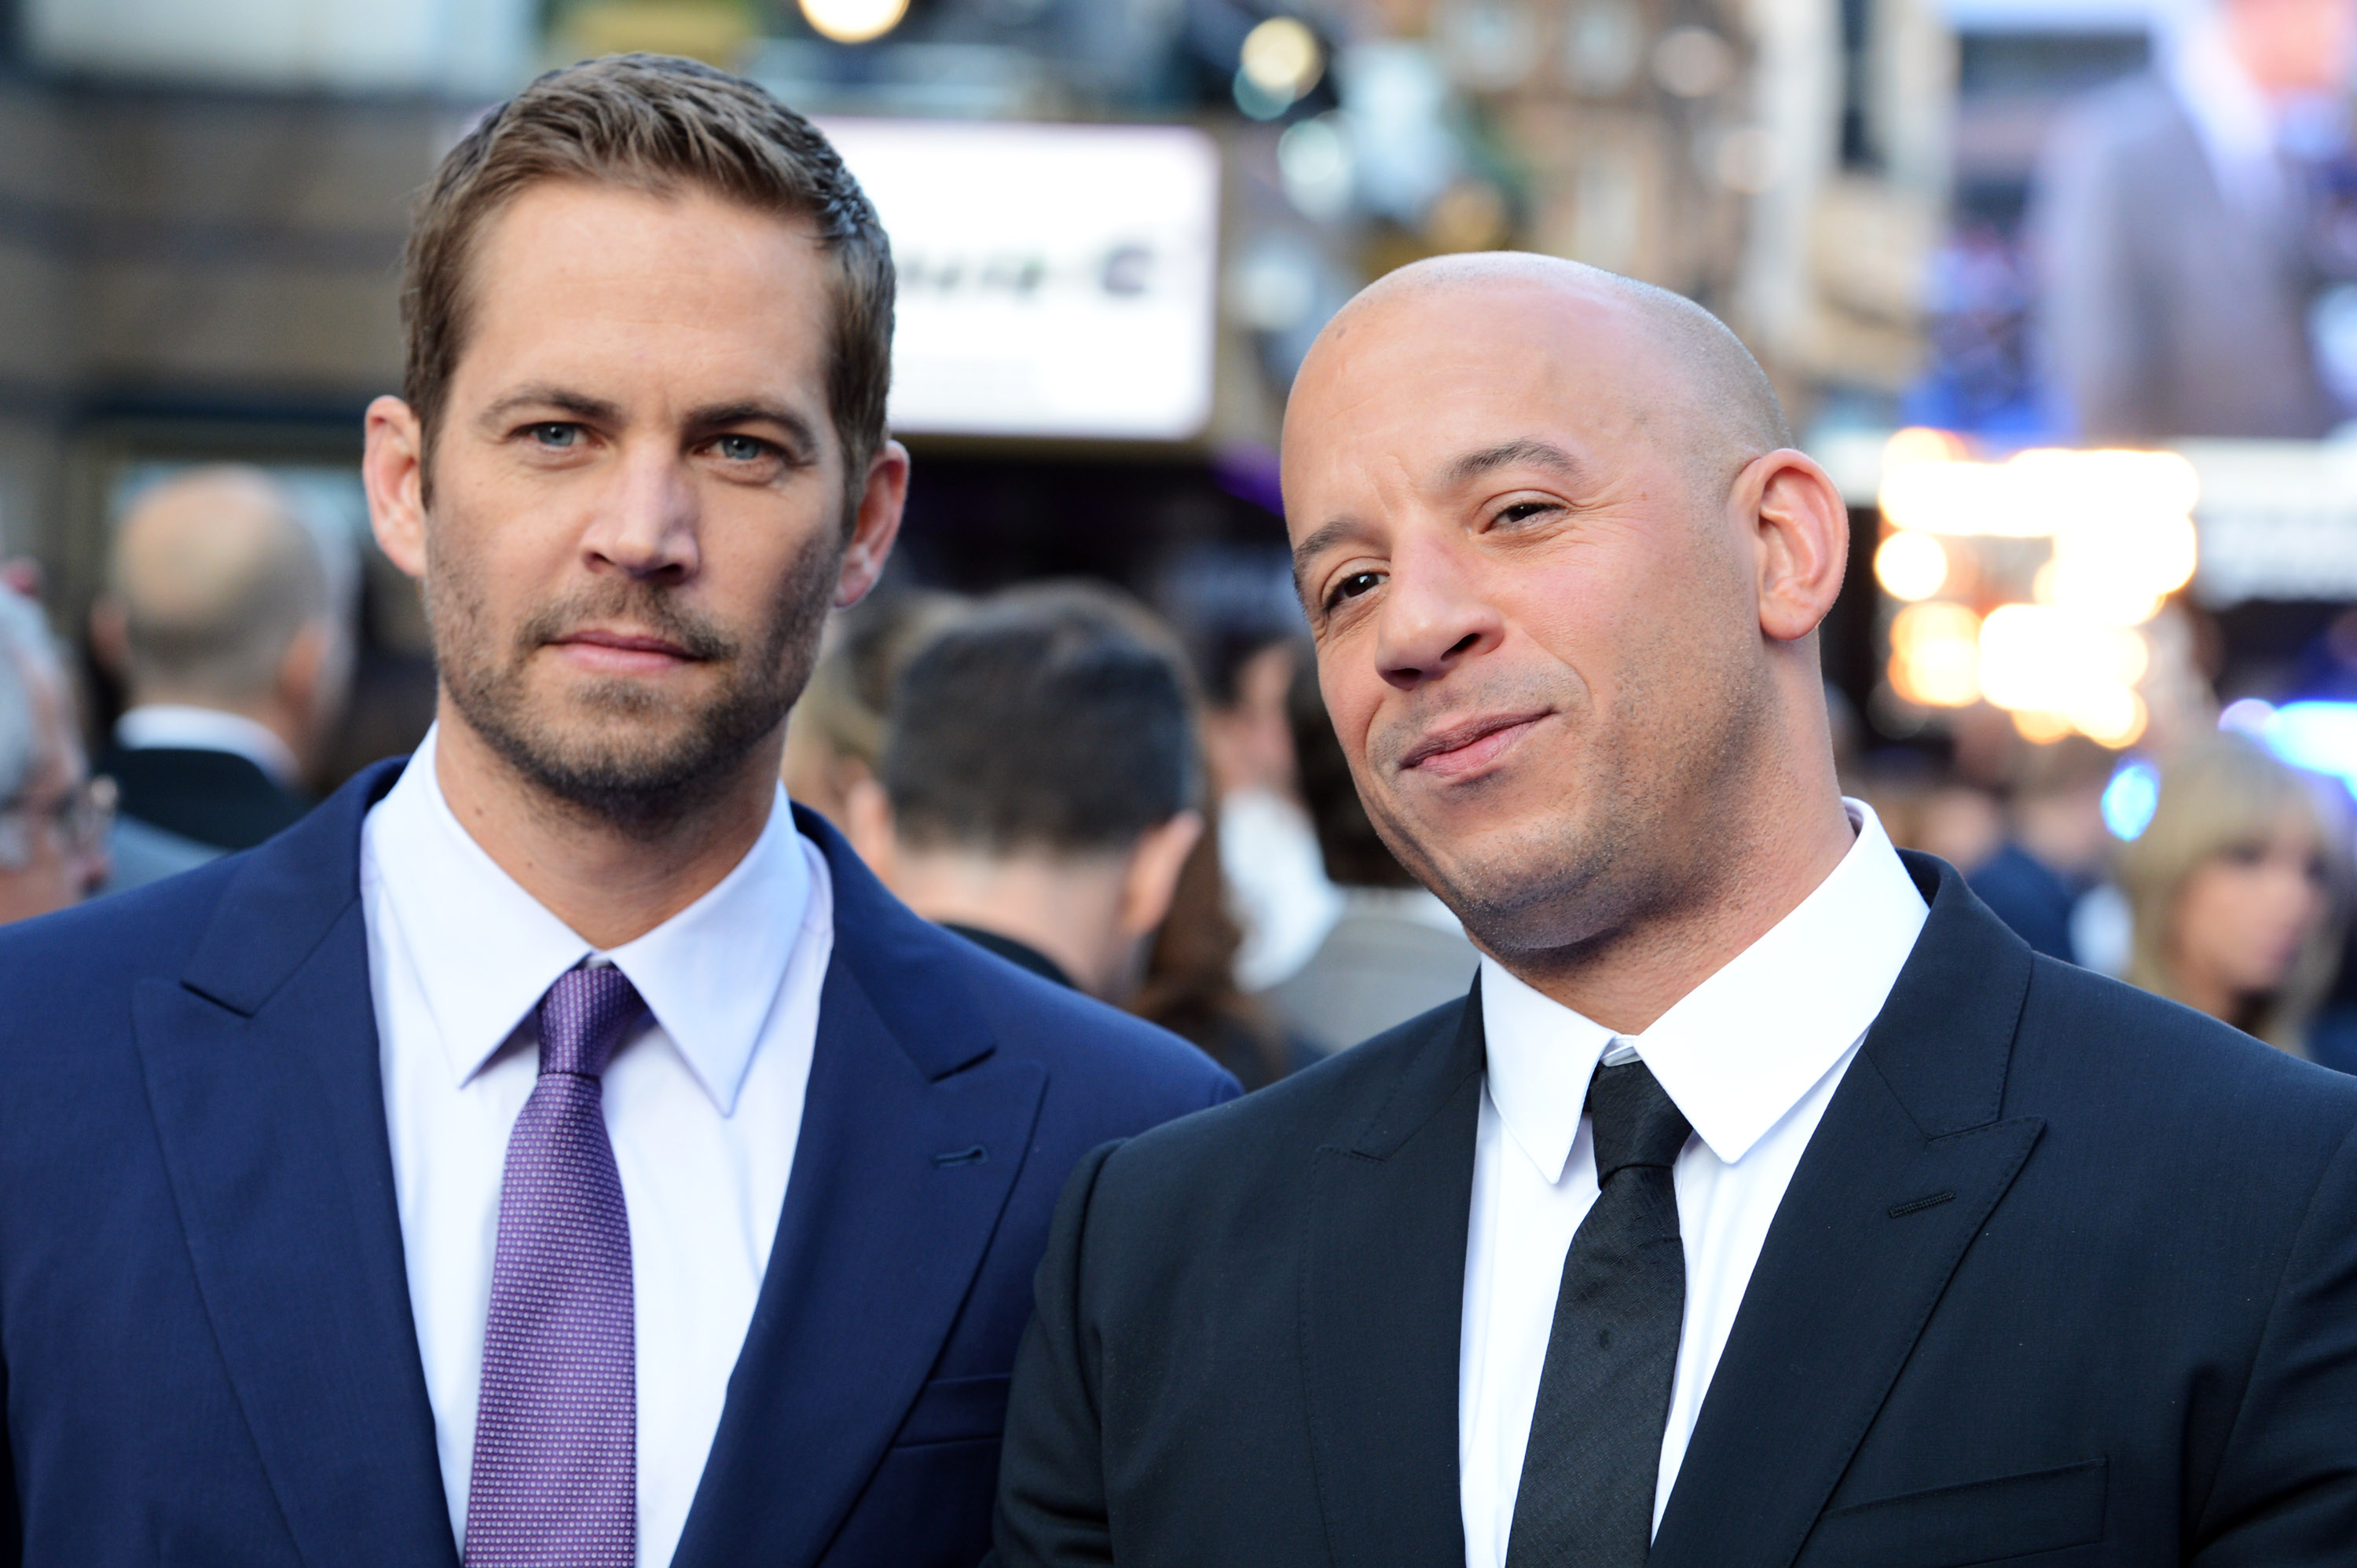 Paul Walker and Vin Diesel attend the world premiere of 'Fast And Furious 6' at The Empire Leicester Square on May 7, 2013 in London, England | Source: Getty Images